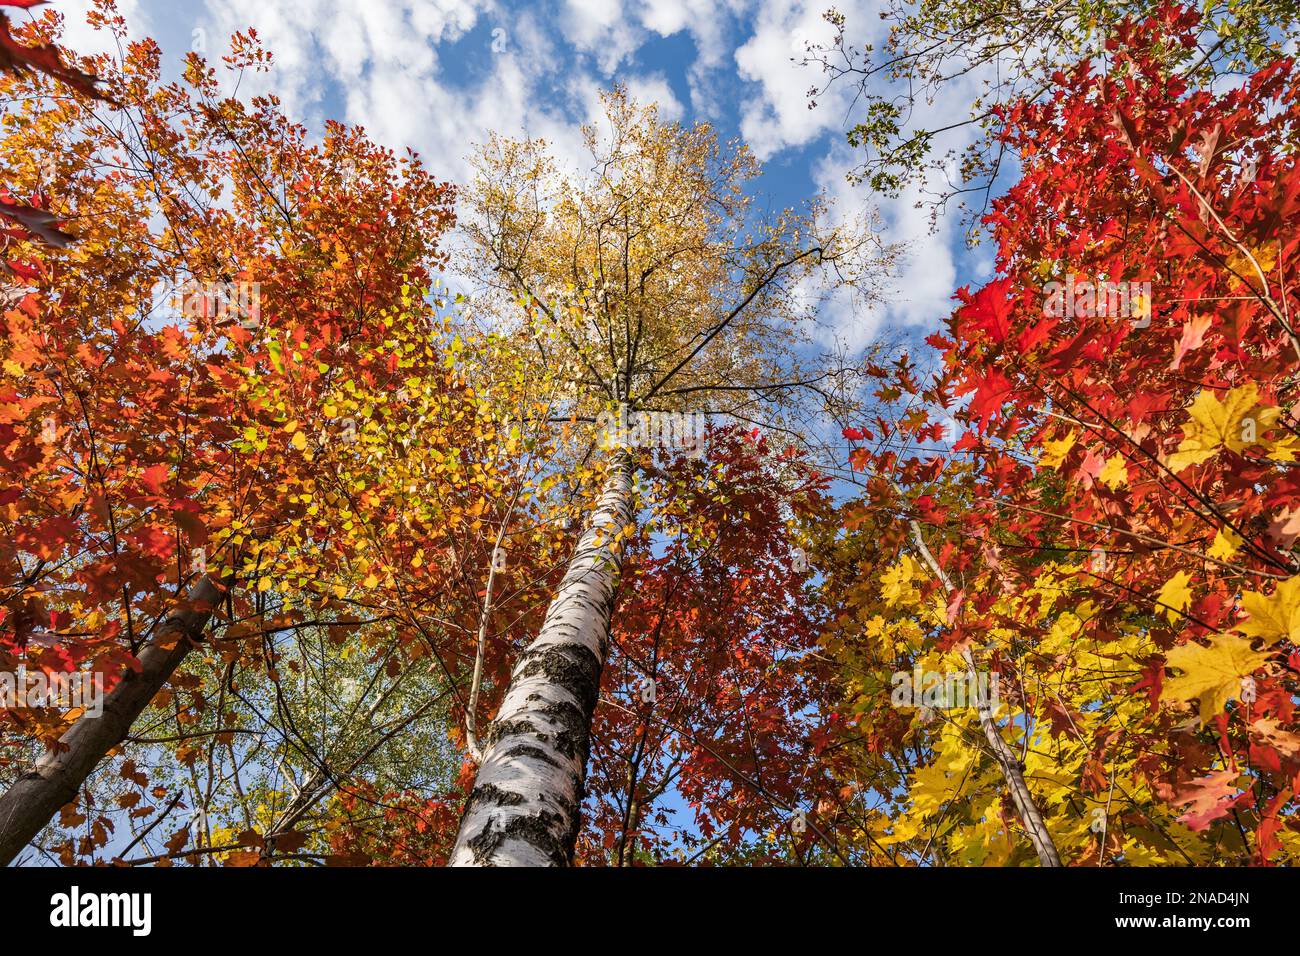 Vibrant autumn season foliage of oak and birch trees in deciduous forest on sunny day with low engle view to canopy and sky. Stock Photo